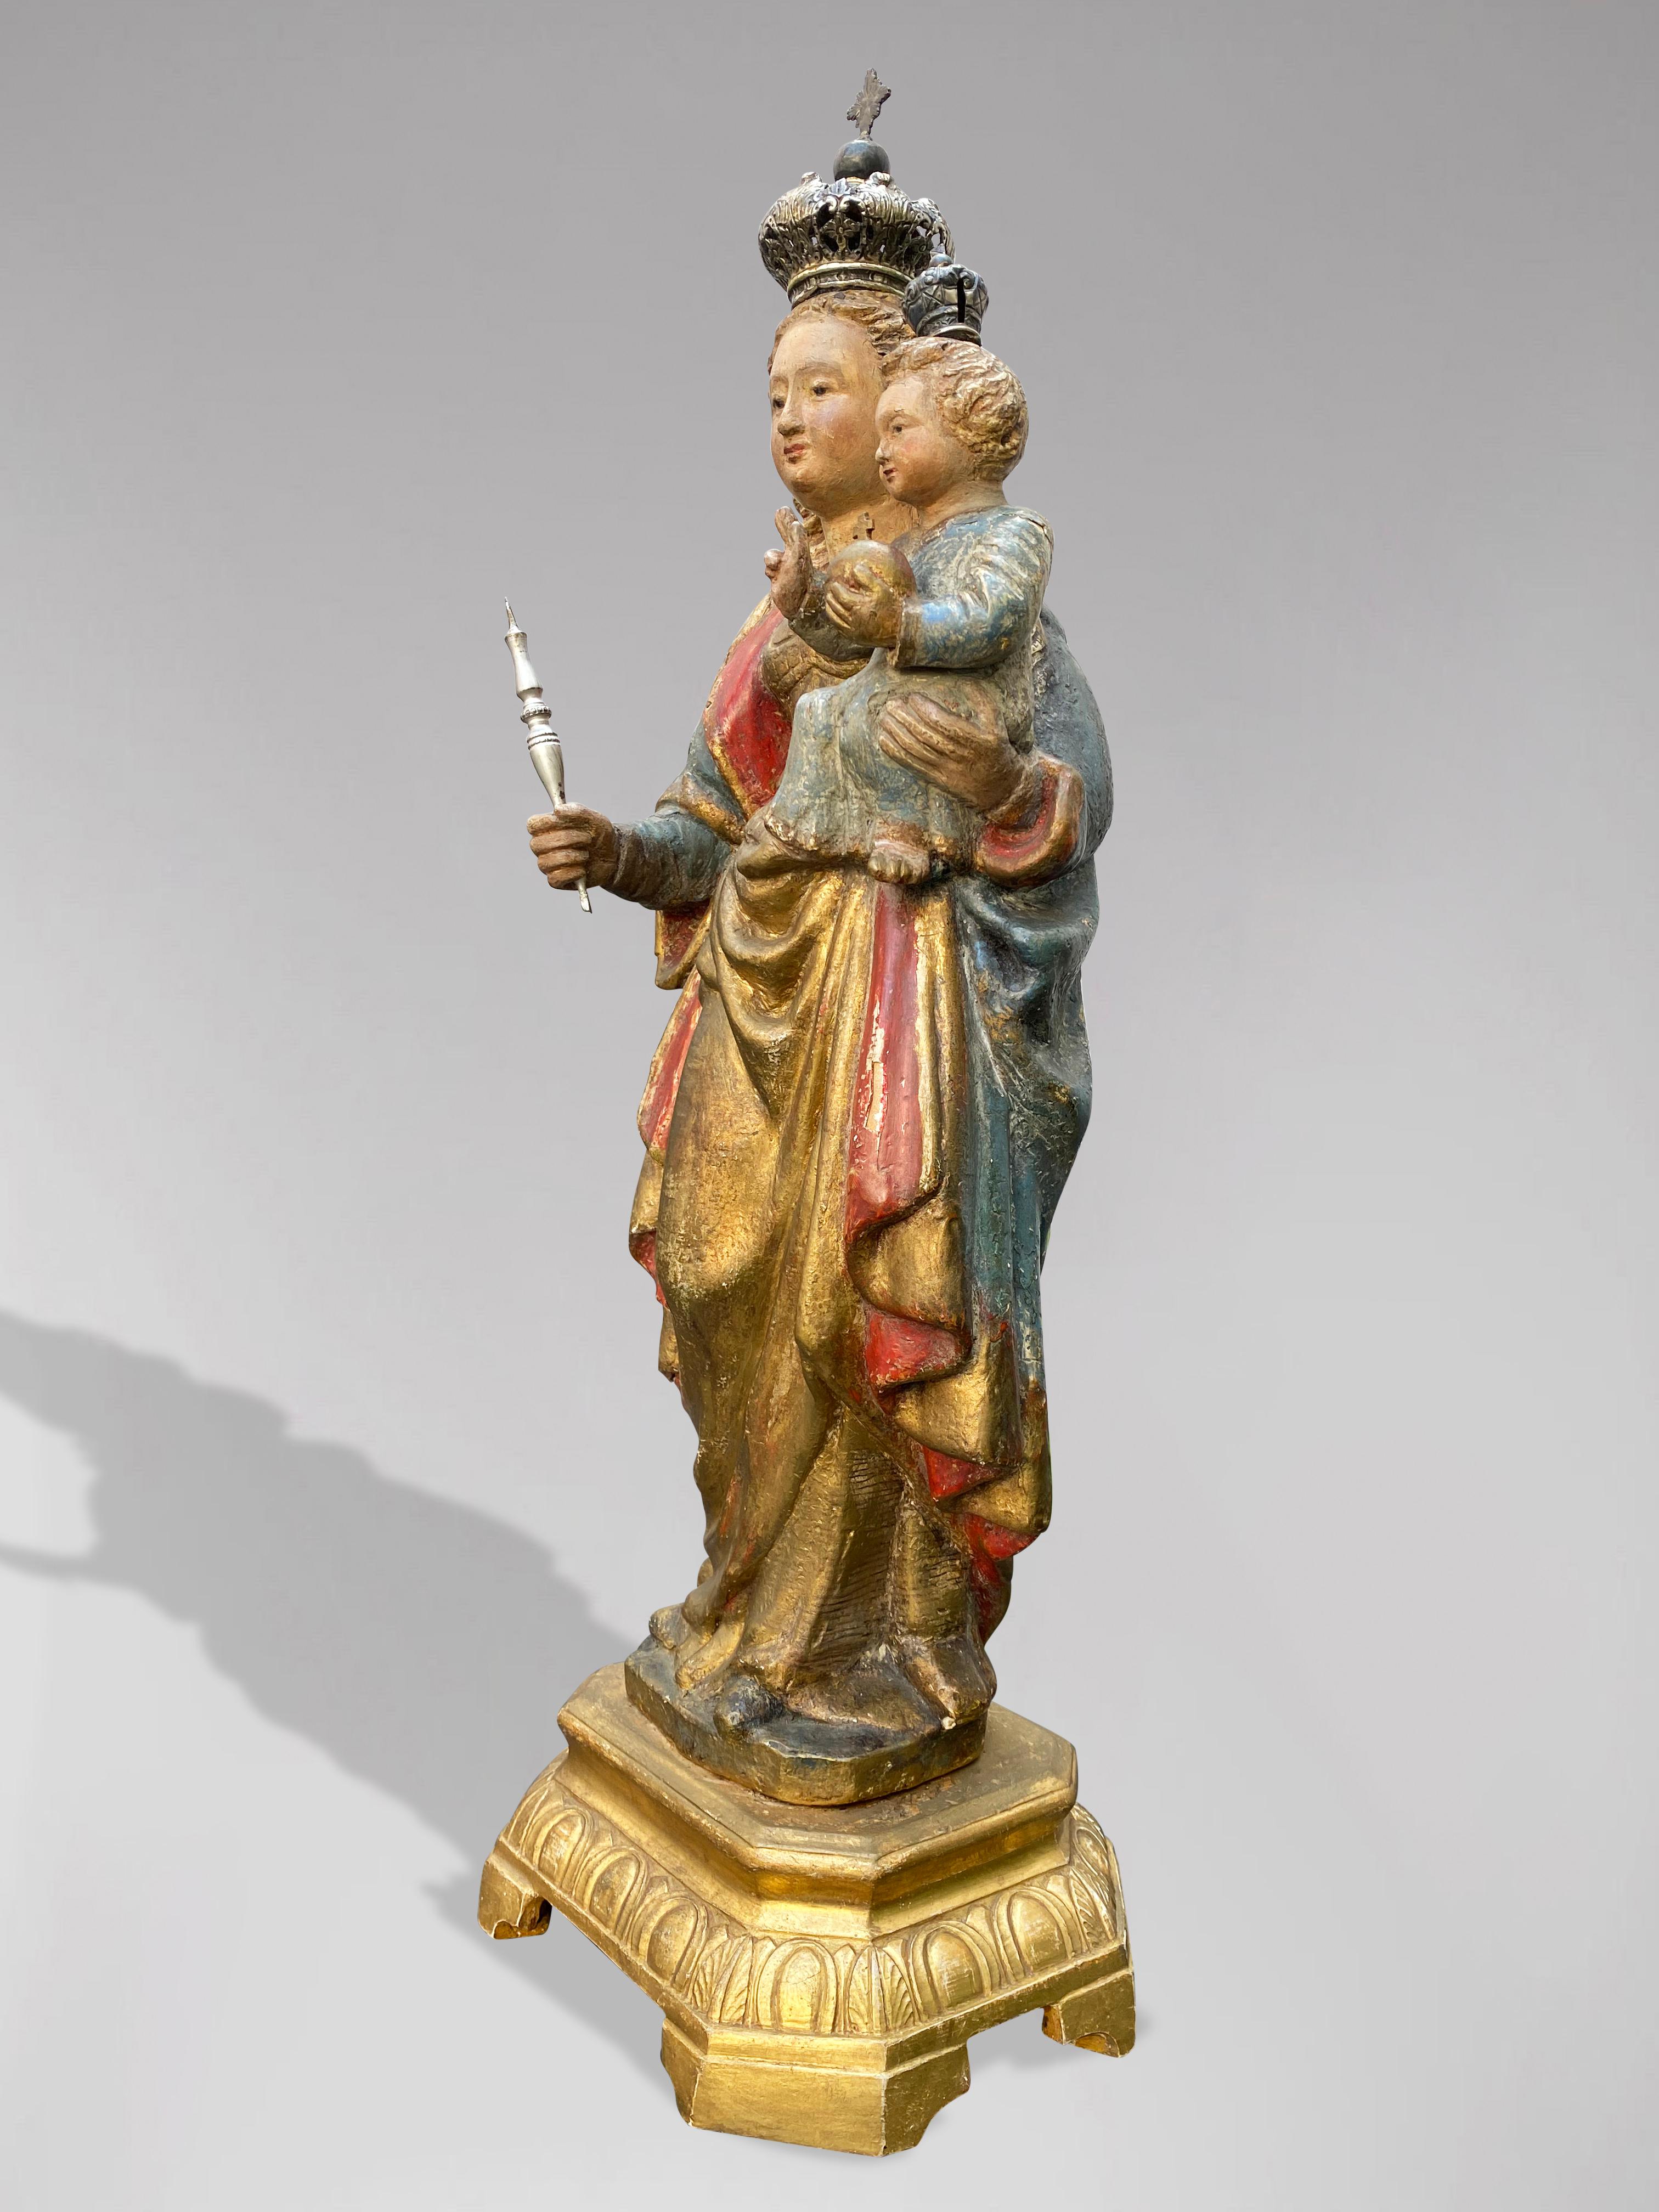 A Flemish Statue of Crowned Virgin Mary with Child Jesus, 17th Century - Sculpture by Unknown